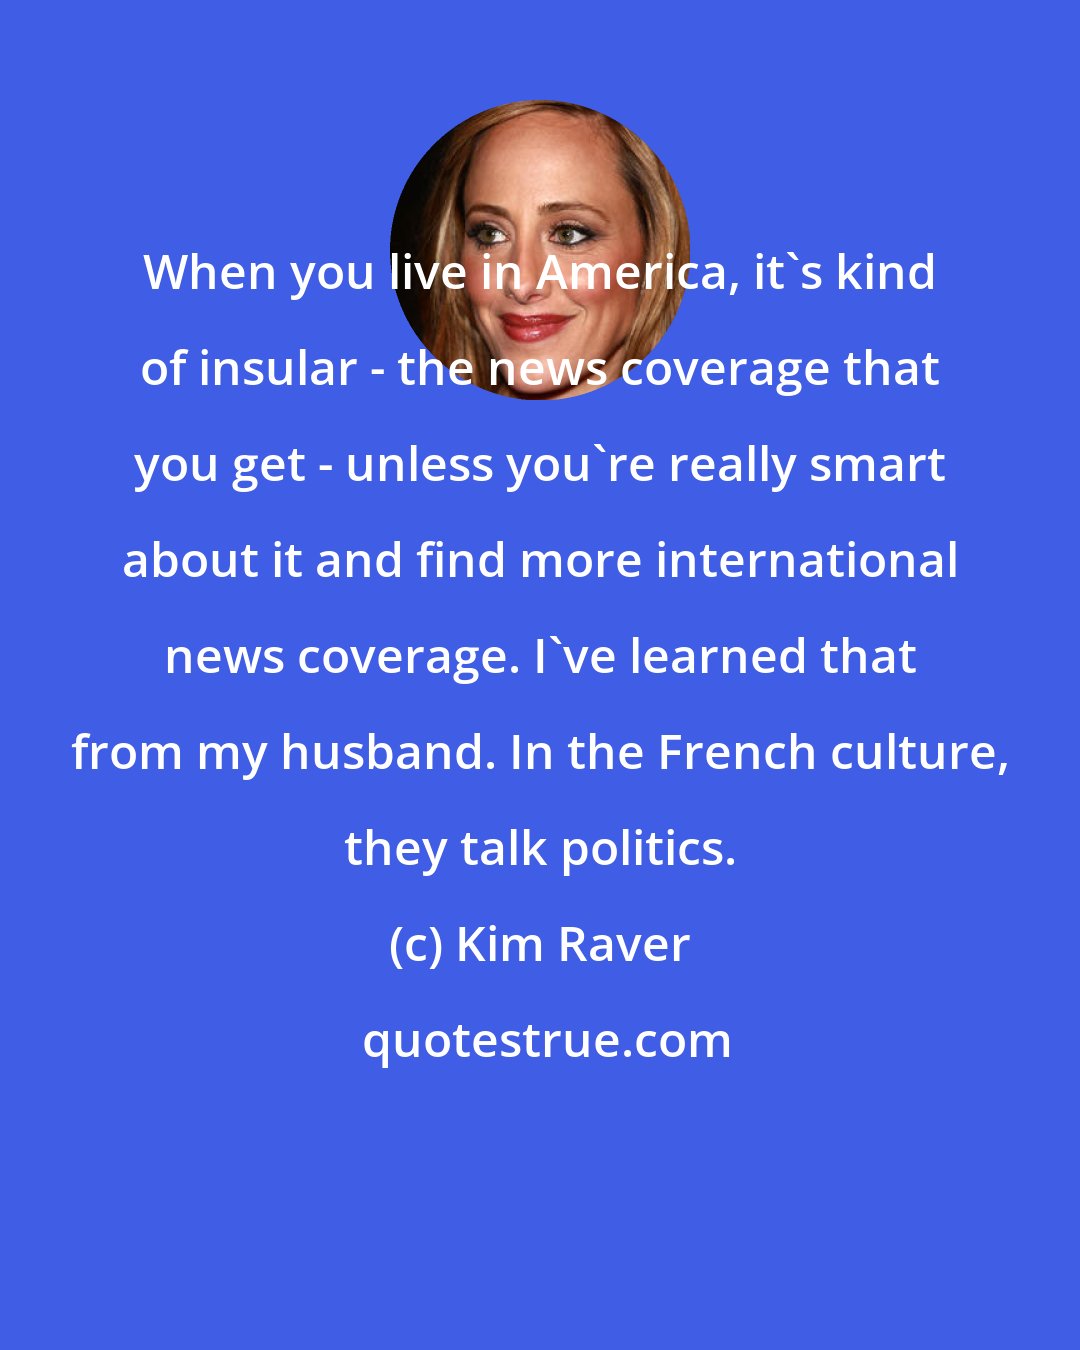 Kim Raver: When you live in America, it's kind of insular - the news coverage that you get - unless you're really smart about it and find more international news coverage. I've learned that from my husband. In the French culture, they talk politics.